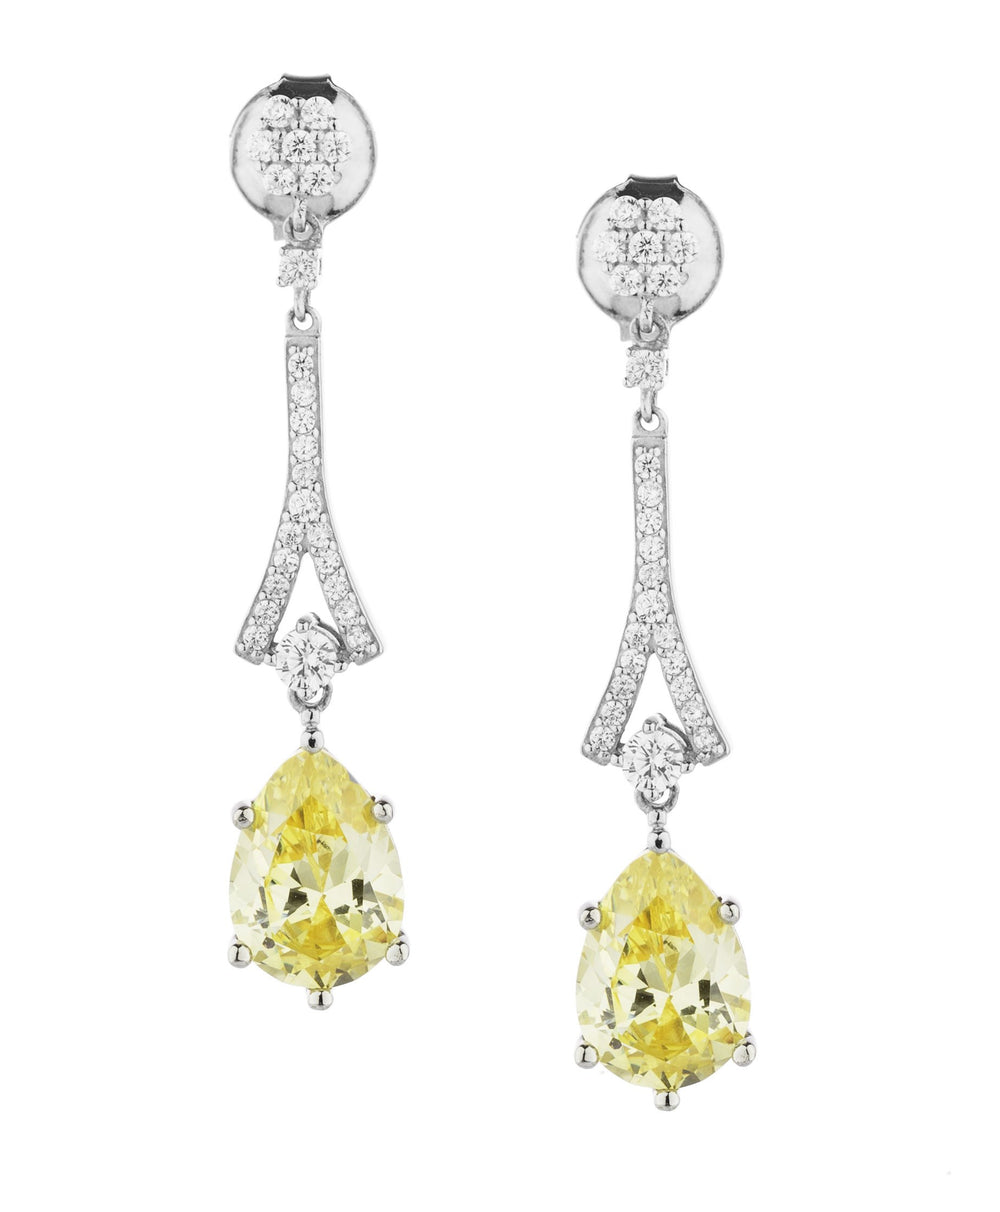 Pear and Round Brilliant drop earrings with 4.06 carats* of diamond simulants in sterling silver